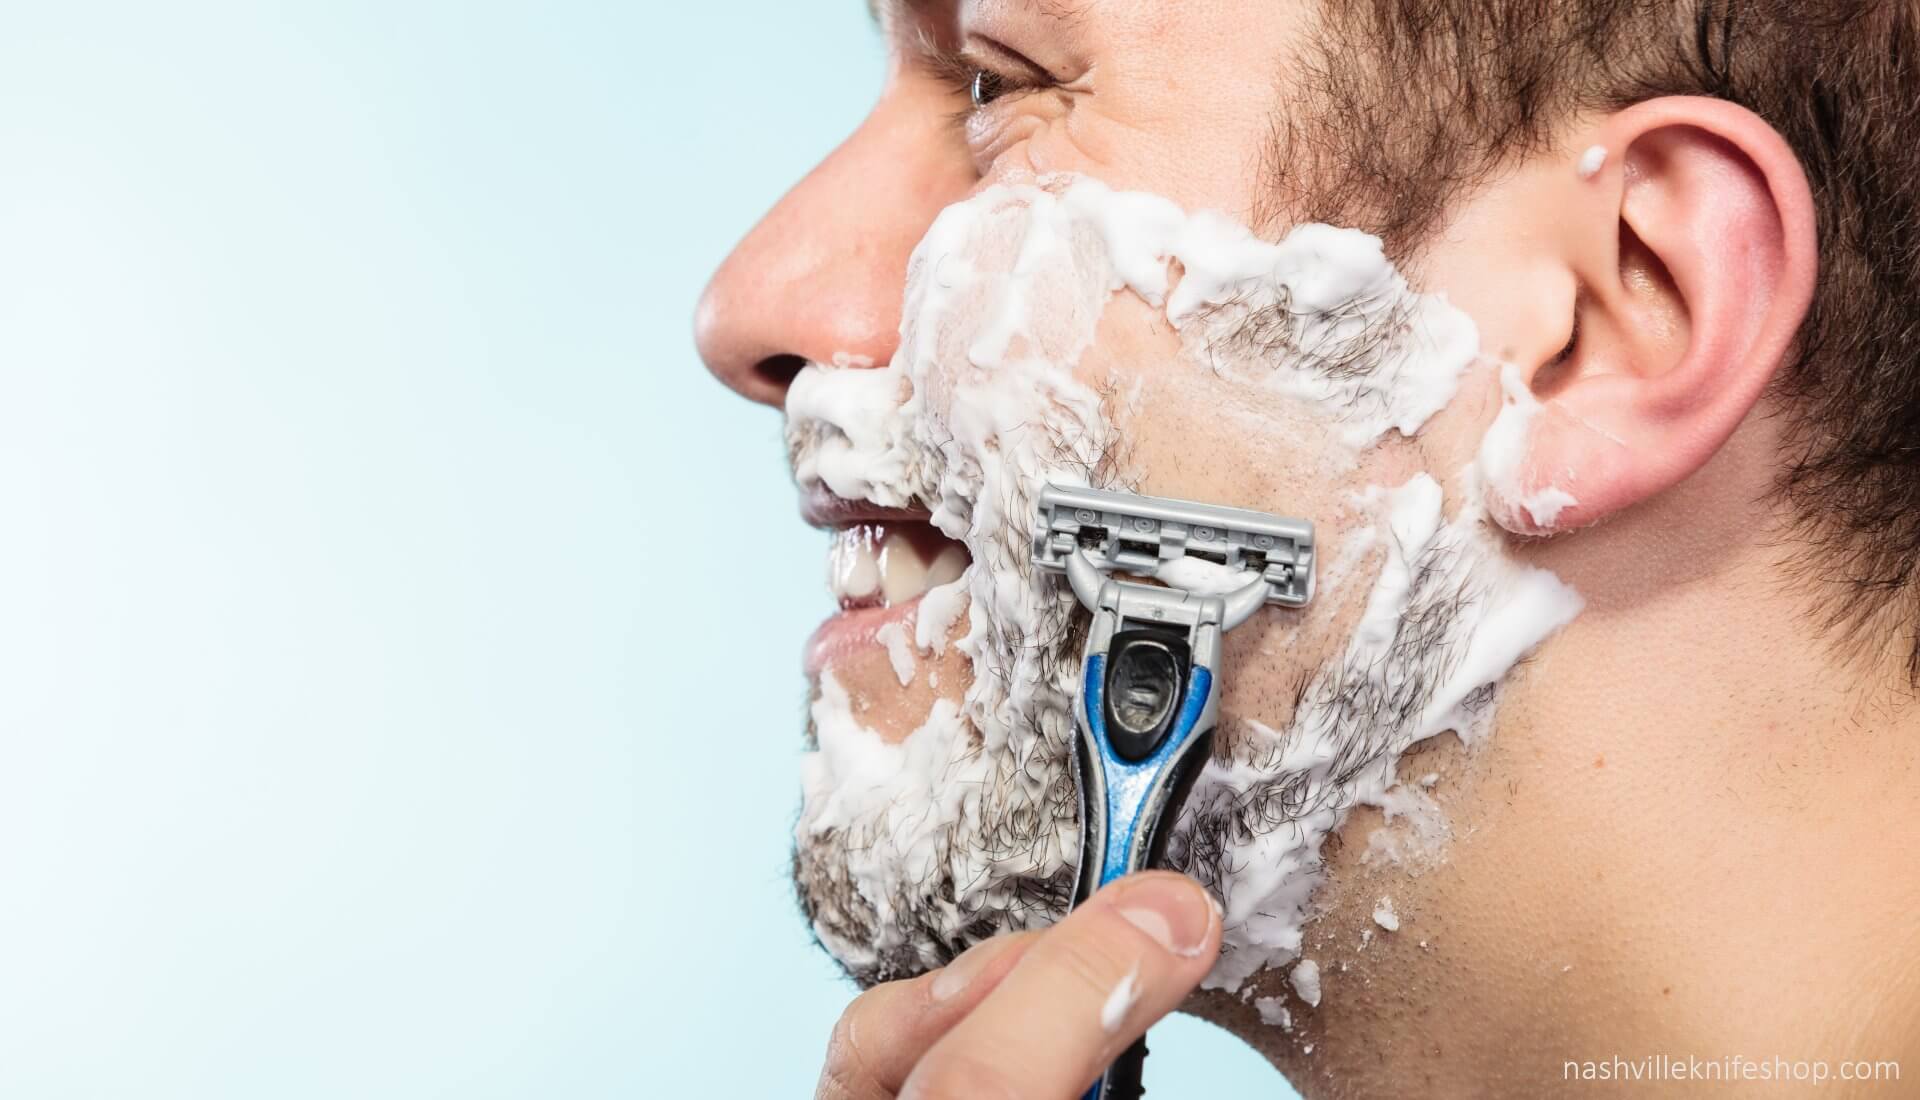 How long does a wet shave take?